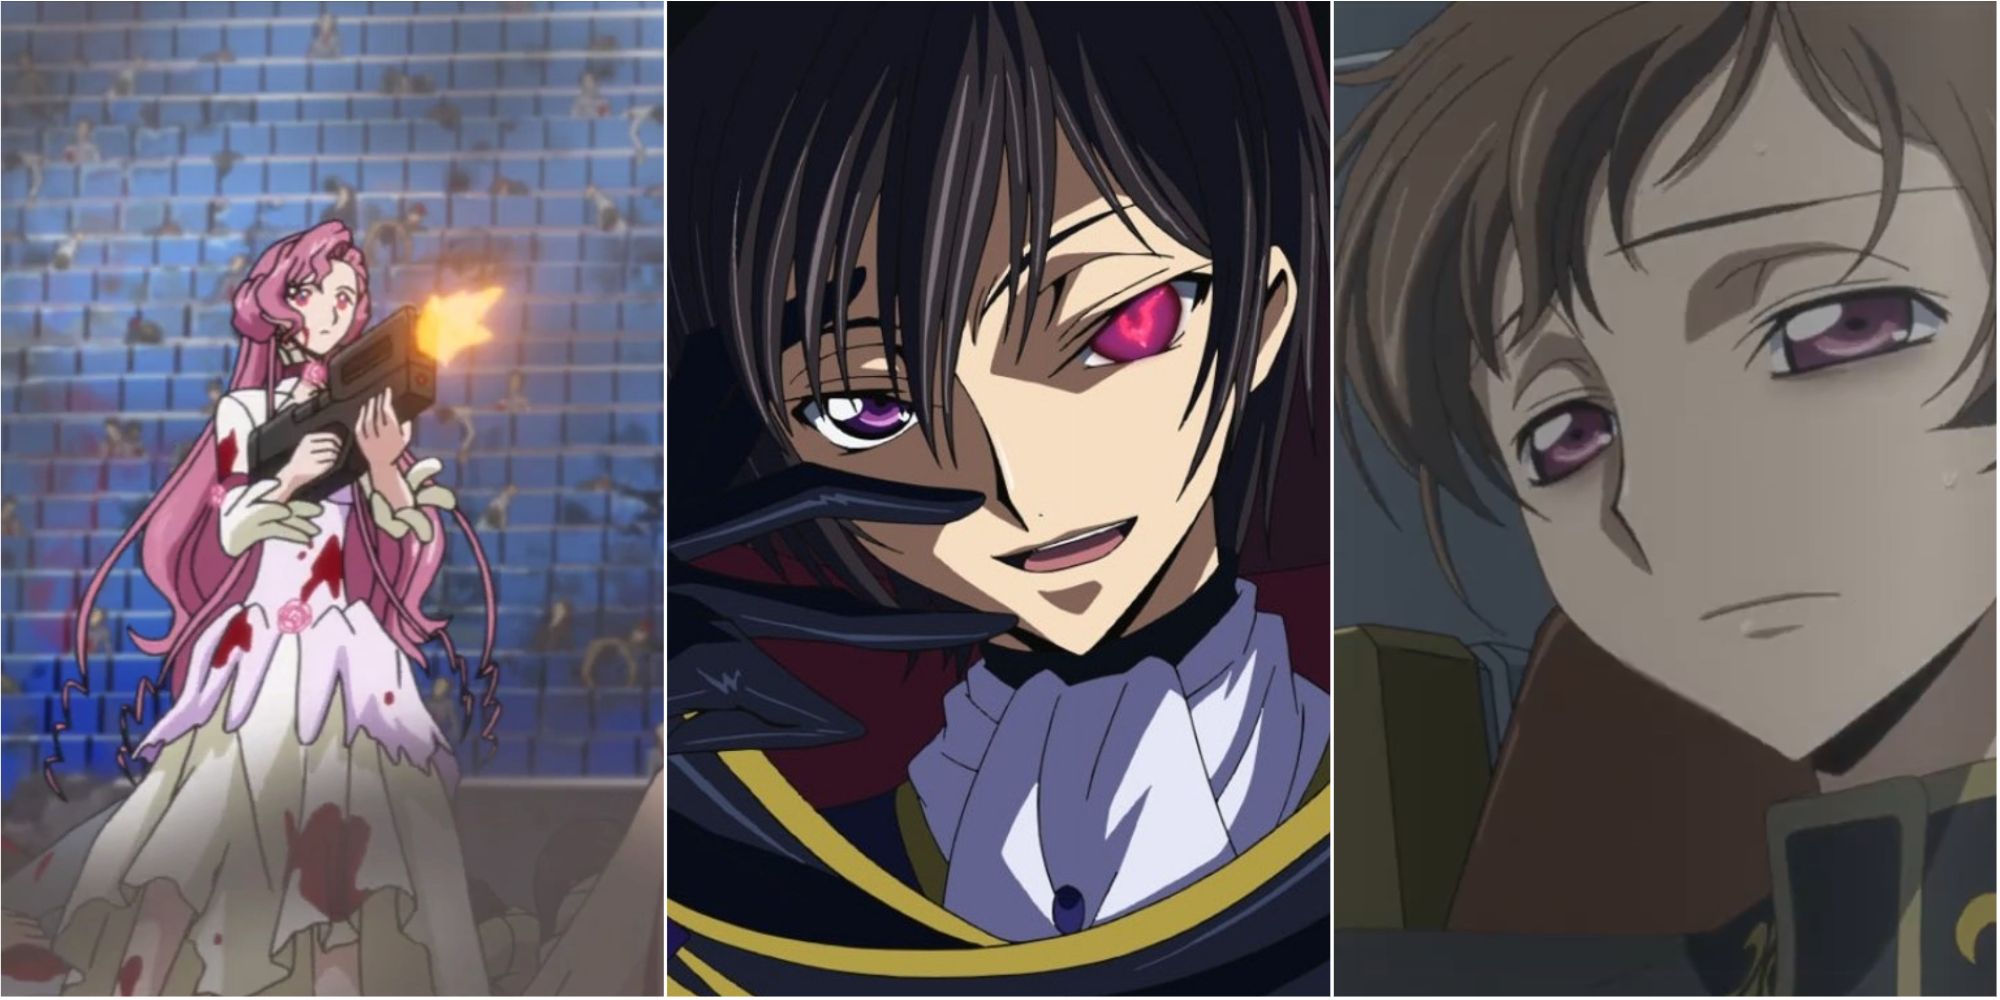 What are some reasons why Lelouch from Code Geass is a bad person? - Quora